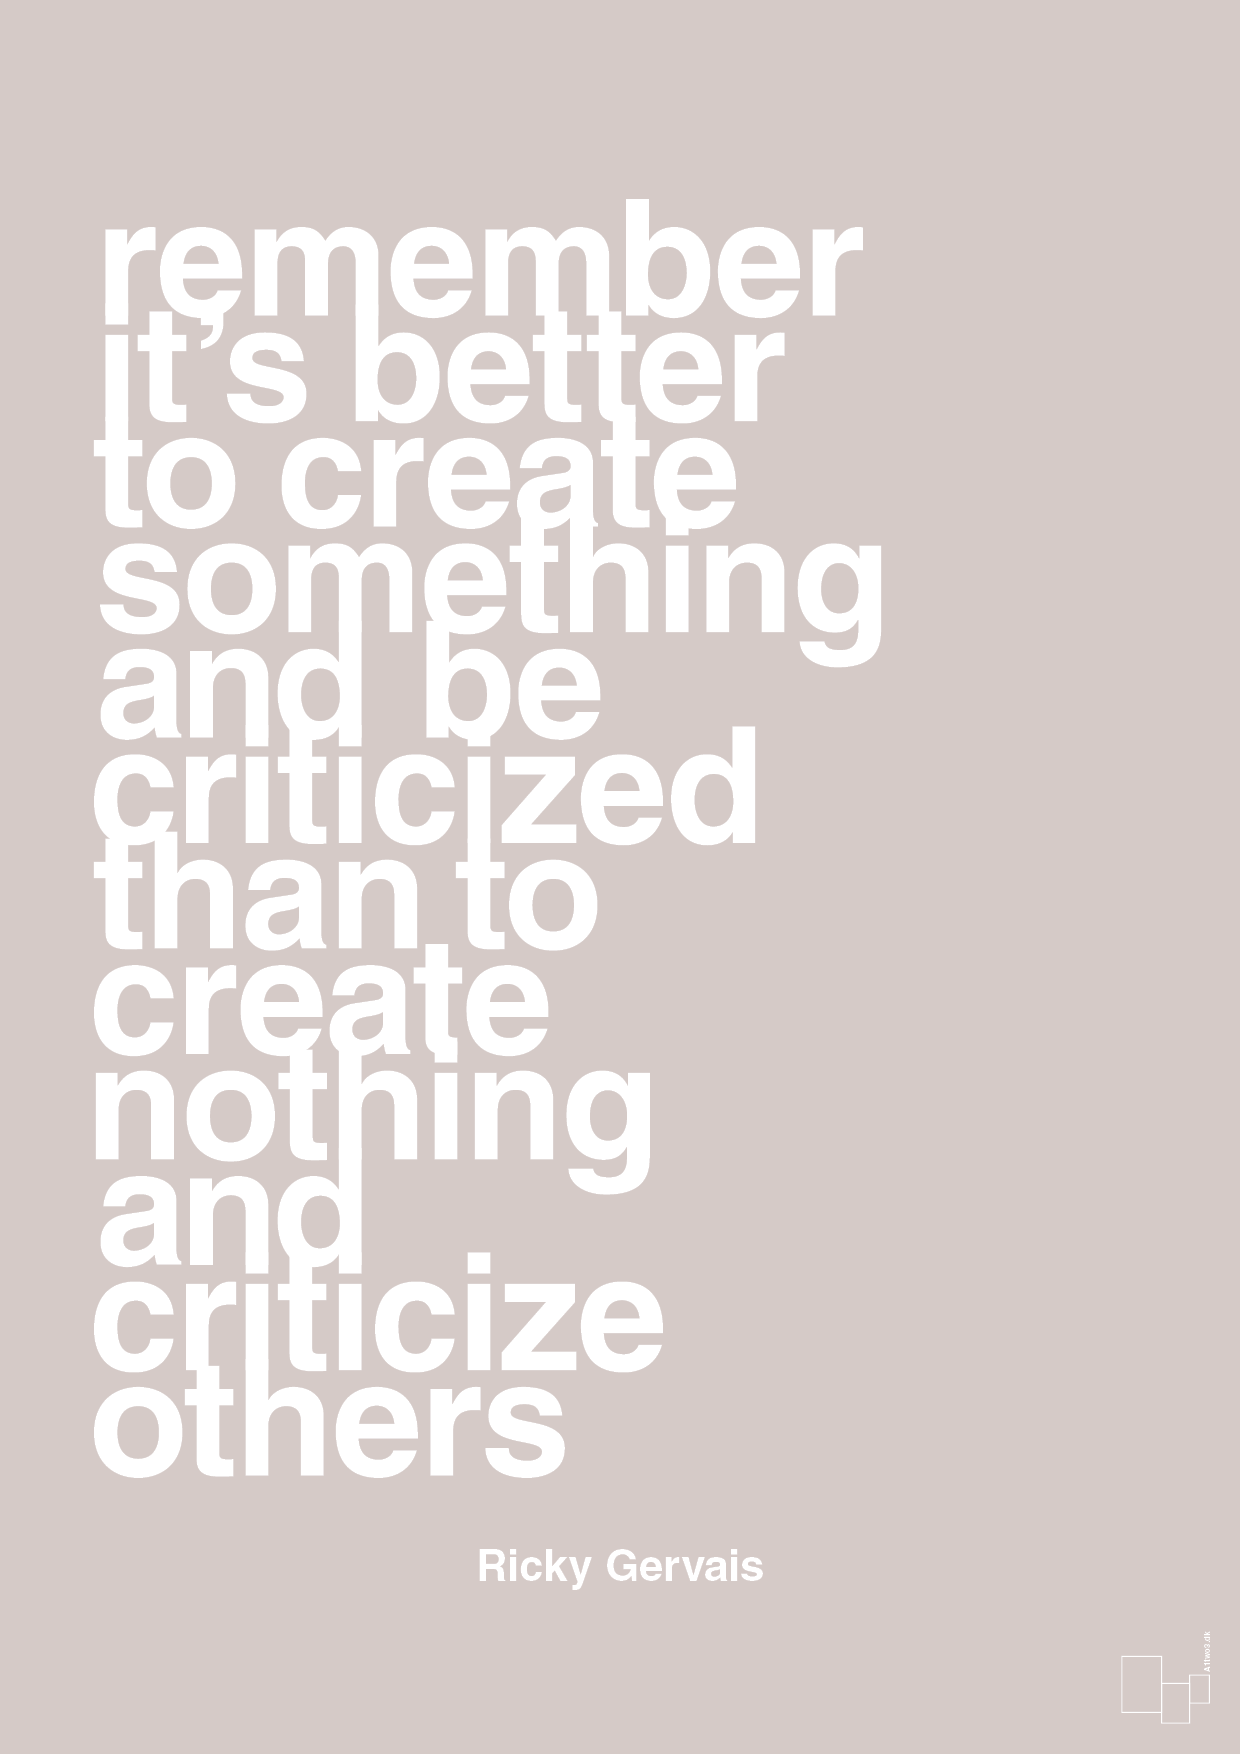 remember its better to create something and be criticized than create nothing and criticize others - Plakat med Citater i Broken Beige